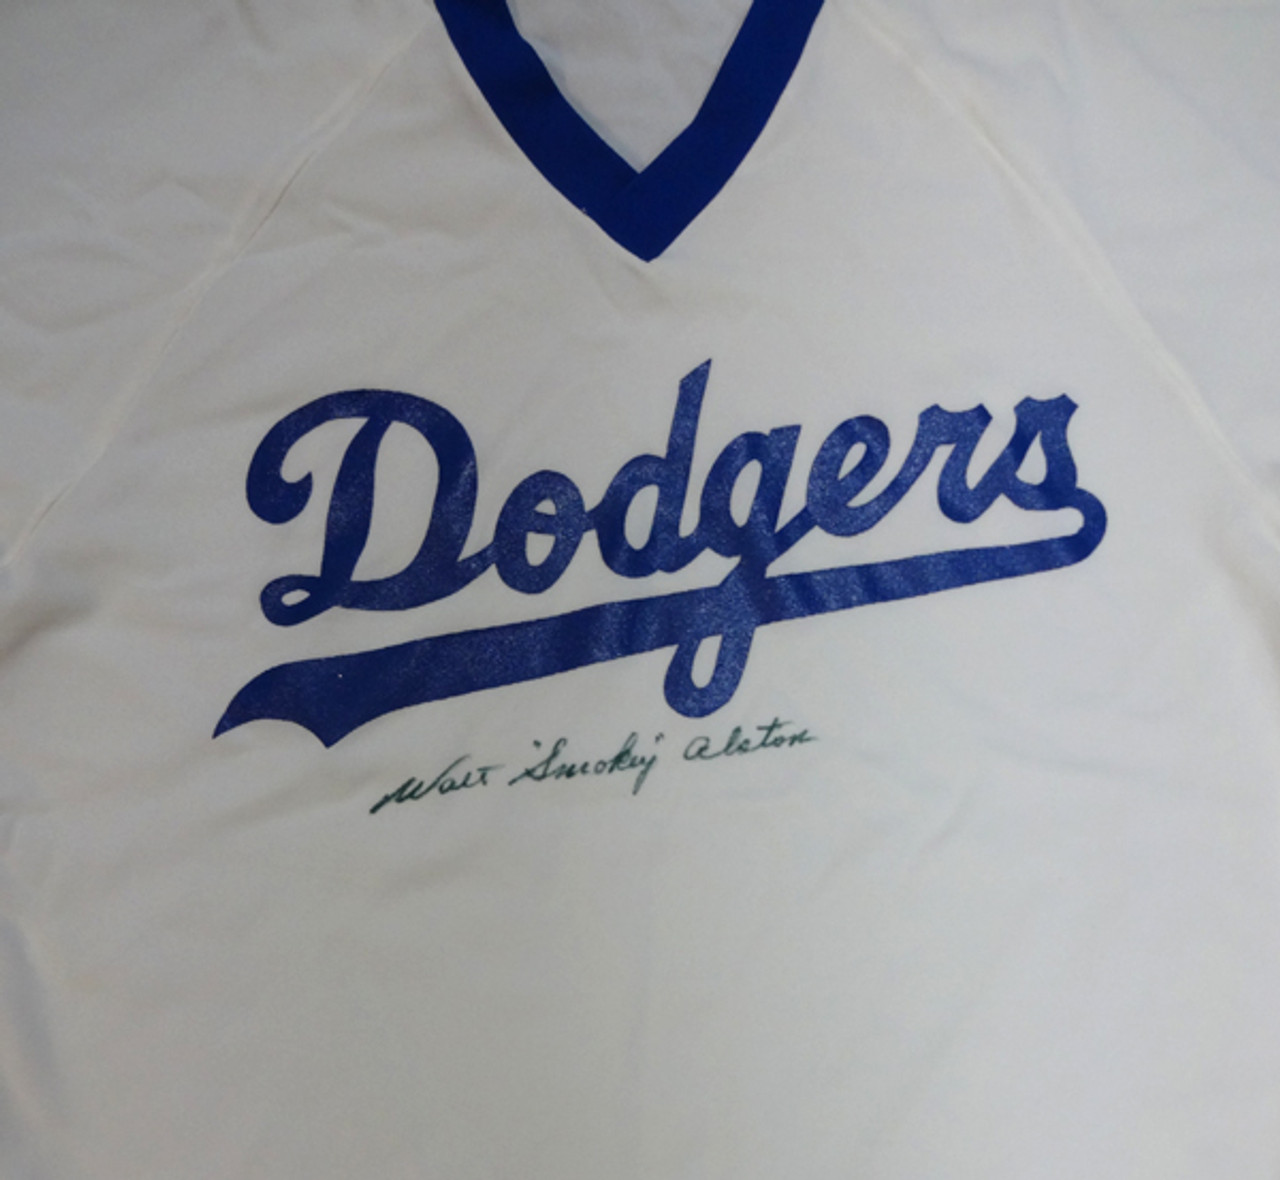 Los Angeles Dodgers VIN Scully Autographed White Majestic Cool Base Jersey Size XL Beckett BAS